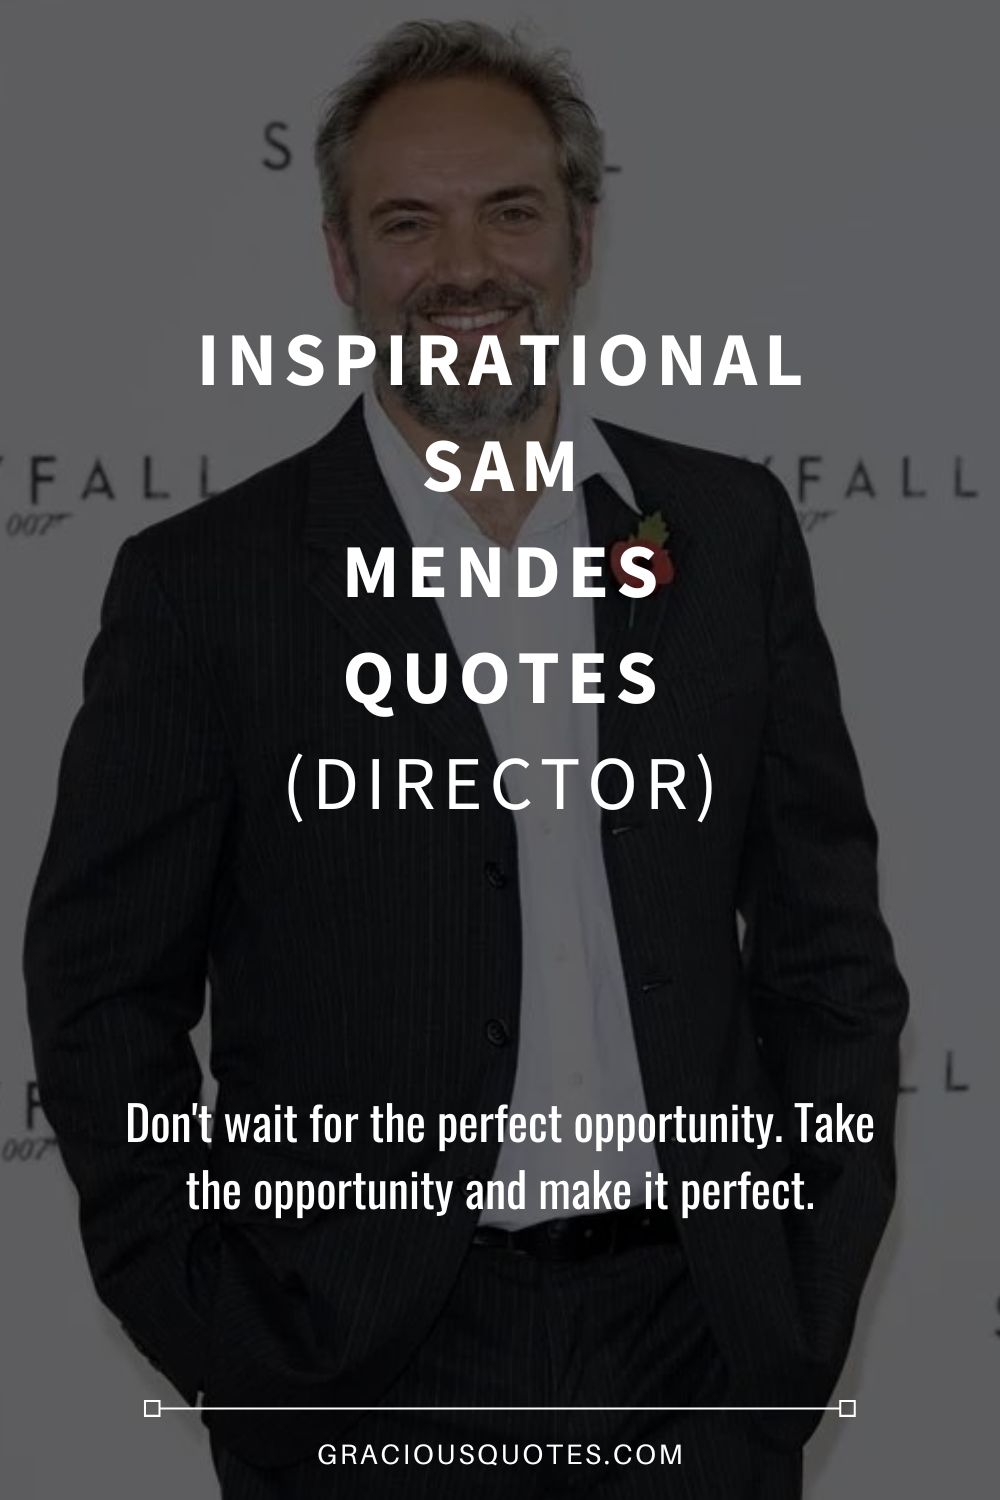 Inspirational Sam Mendes Quotes (DIRECTOR) - Gracious Quotes